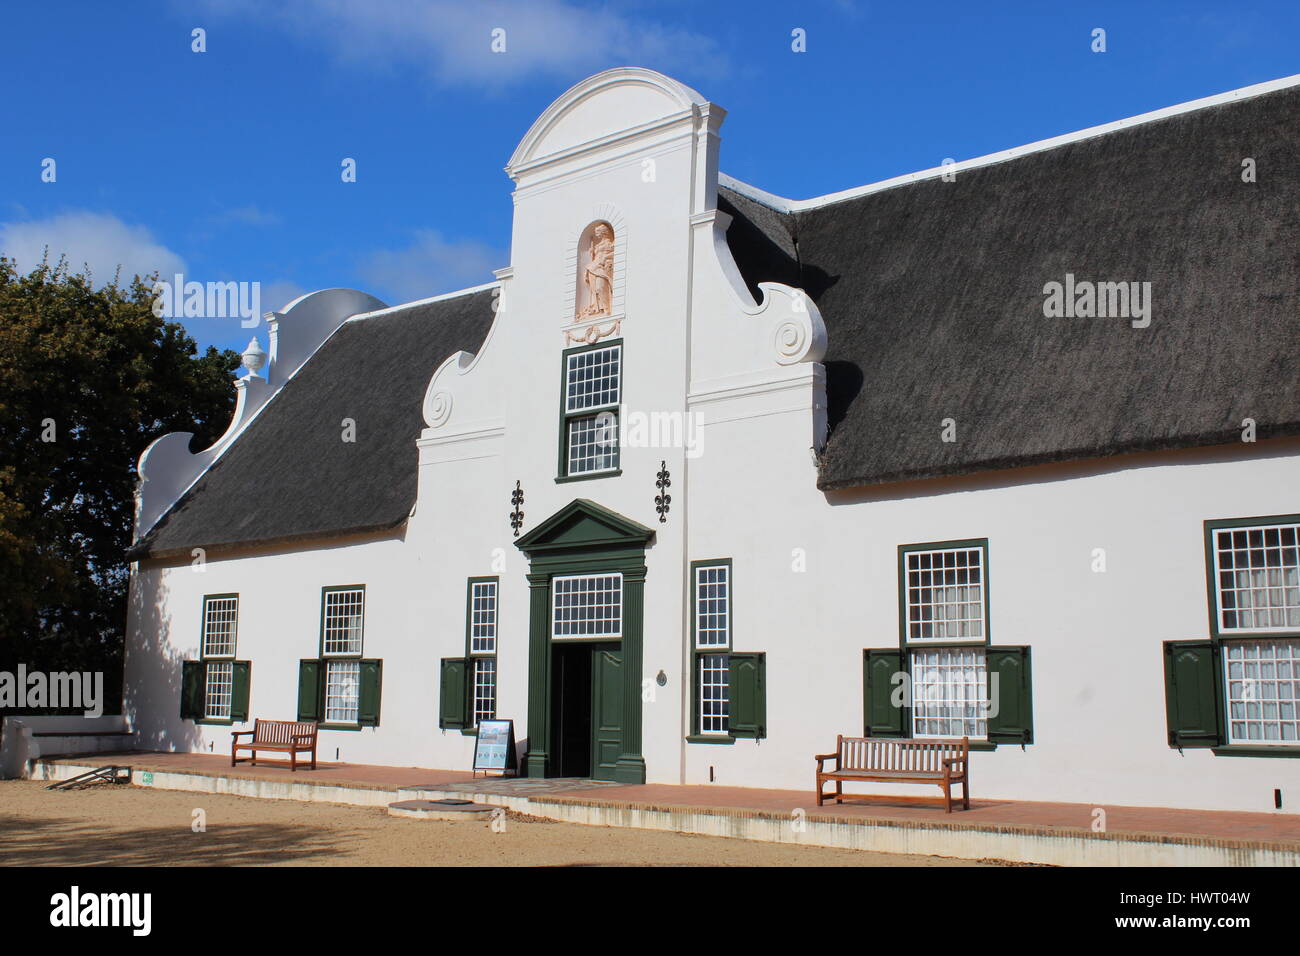 Cape Dutch buildings at Groot Constantia Wine Estate, Cape Town, South Africa Stock Photo